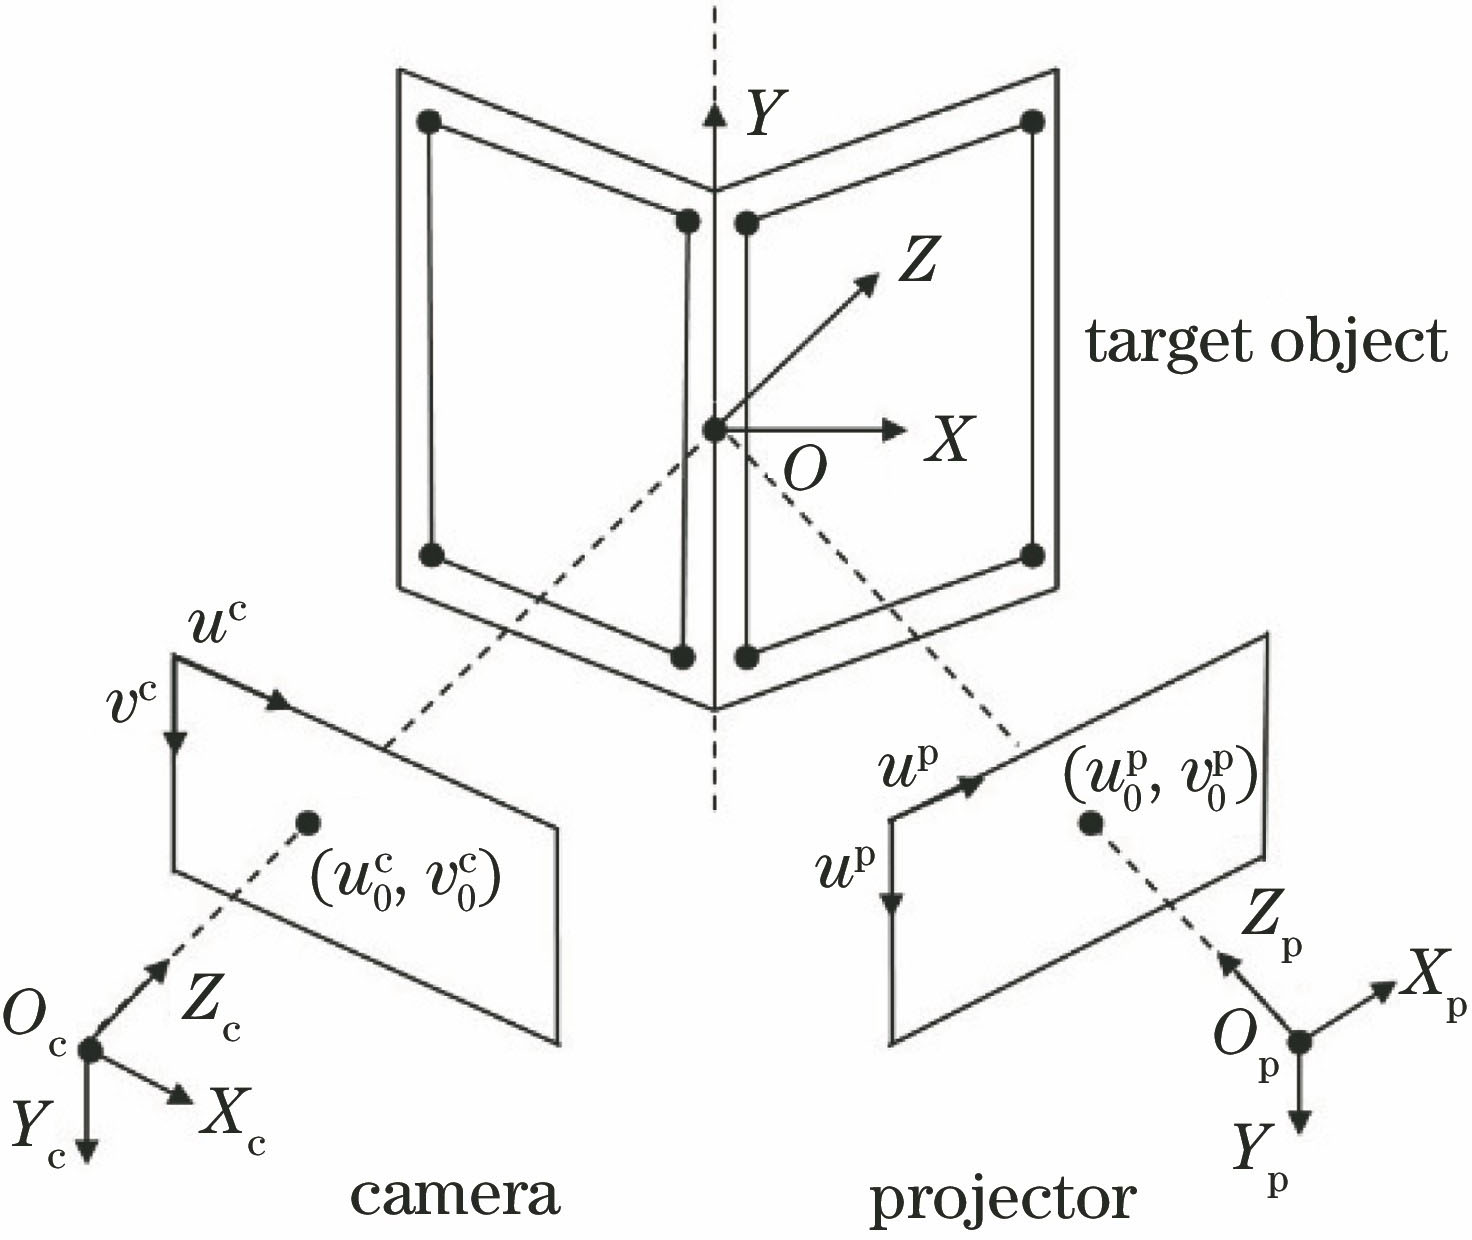 Stereo target for calibration of structured-light system